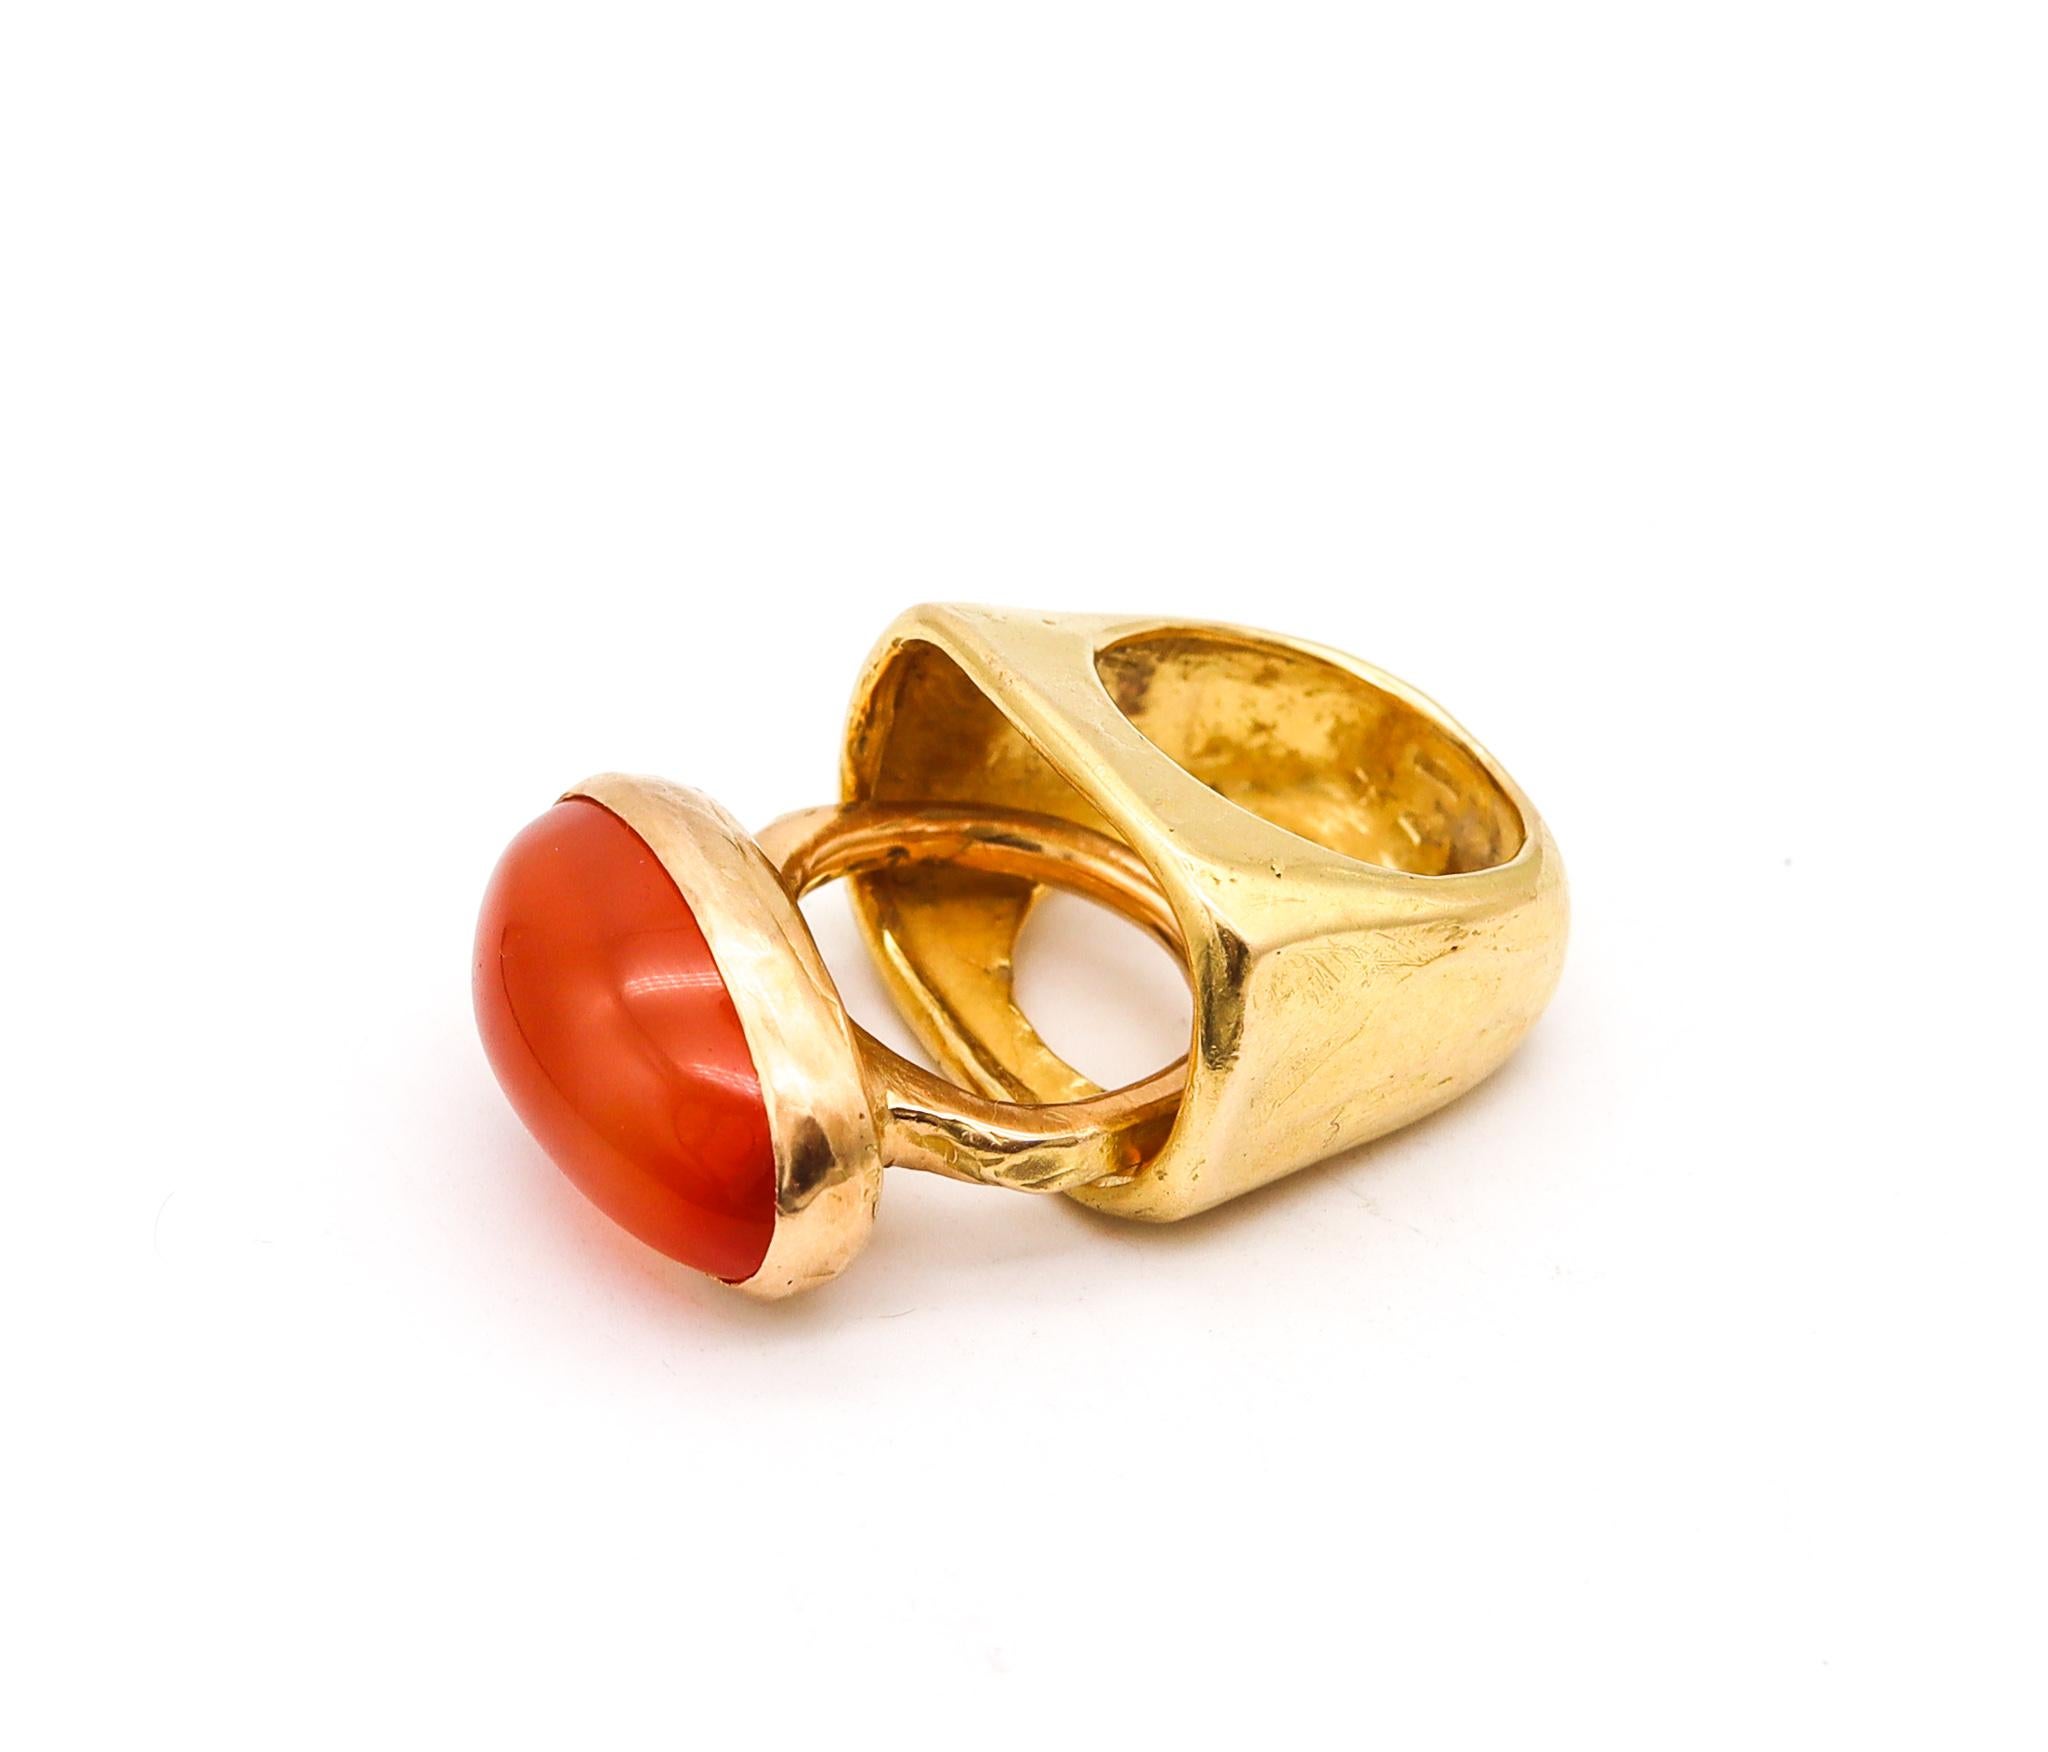 Cabochon Alvaro & Correnti Messina Convertible Cocktail Ring 18Kt Gold 18.8 Cts Carnelian For Sale